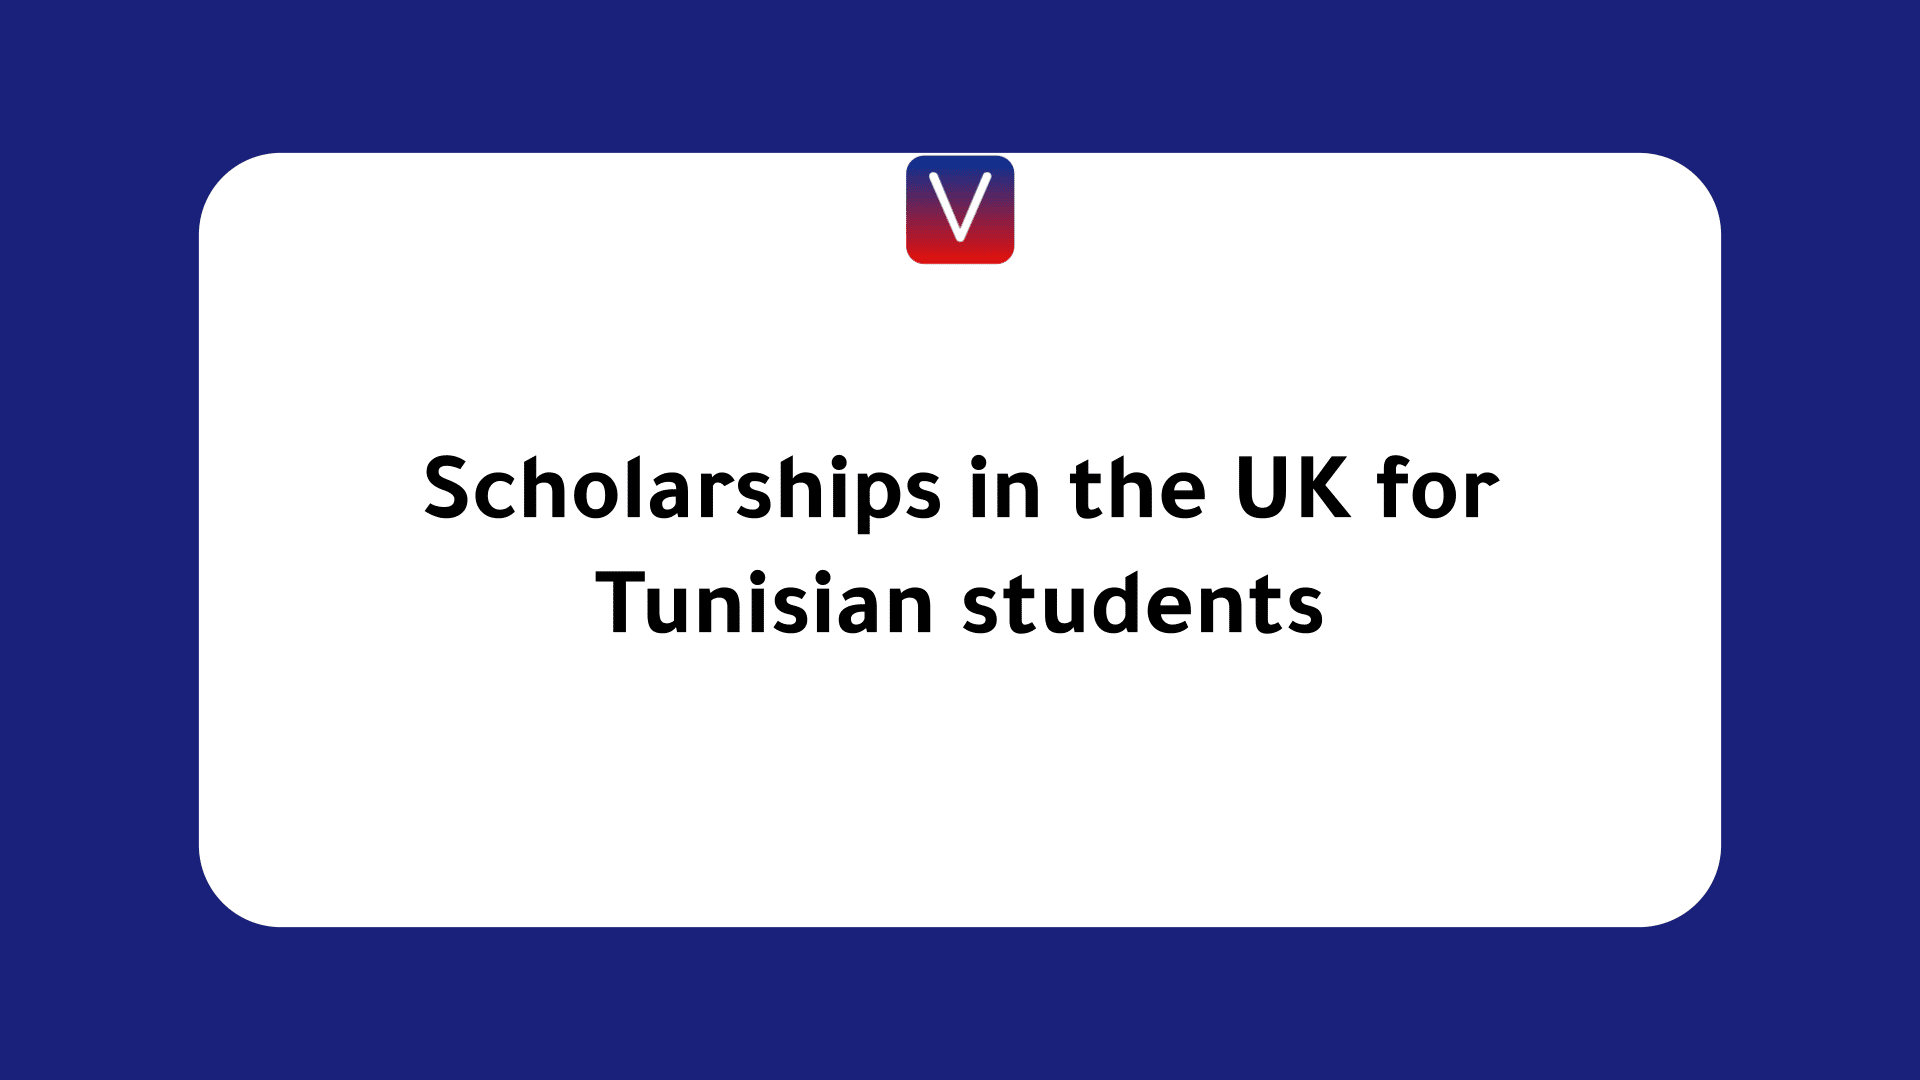 Scholarships in the UK for Tunisian students